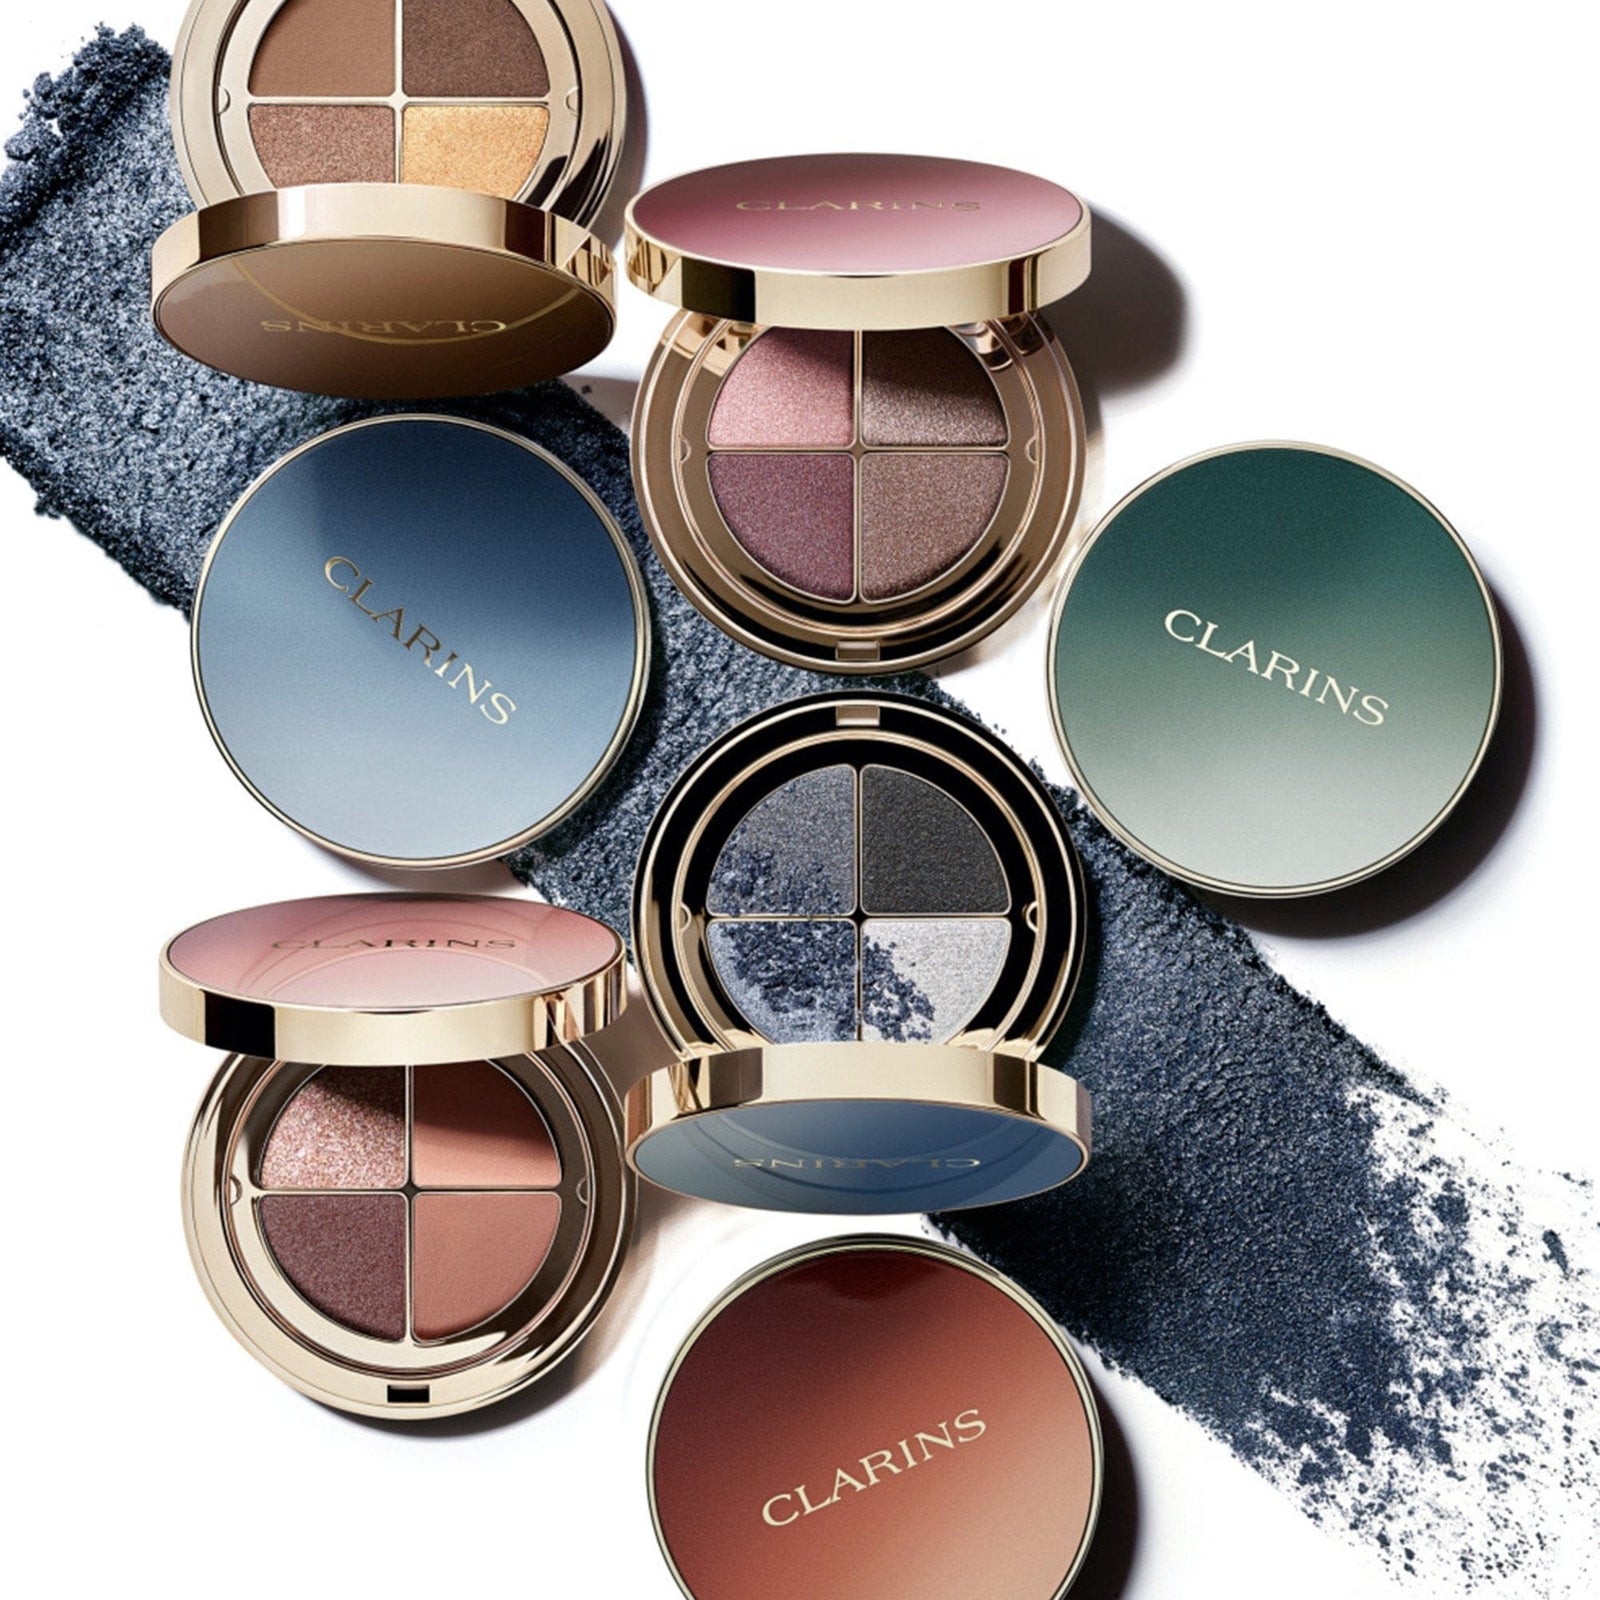 Clarins Ombre 4 Colour Eyeshadow Palette 4.2g